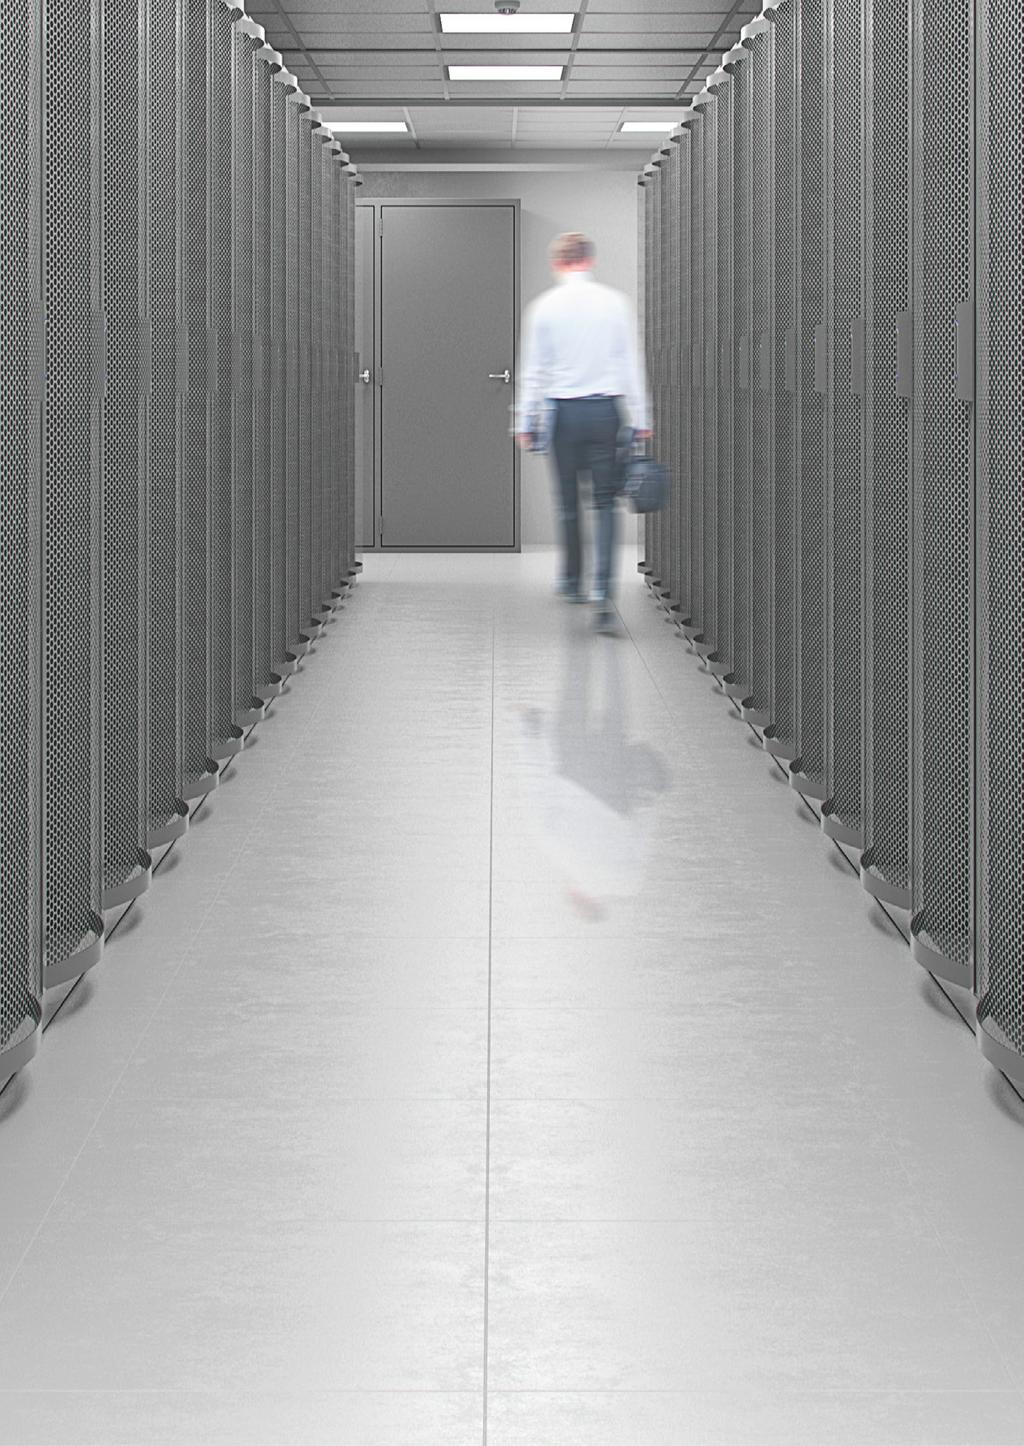 Colocation in the heart of Birmingham Our Tier 3 data centre in the heart of